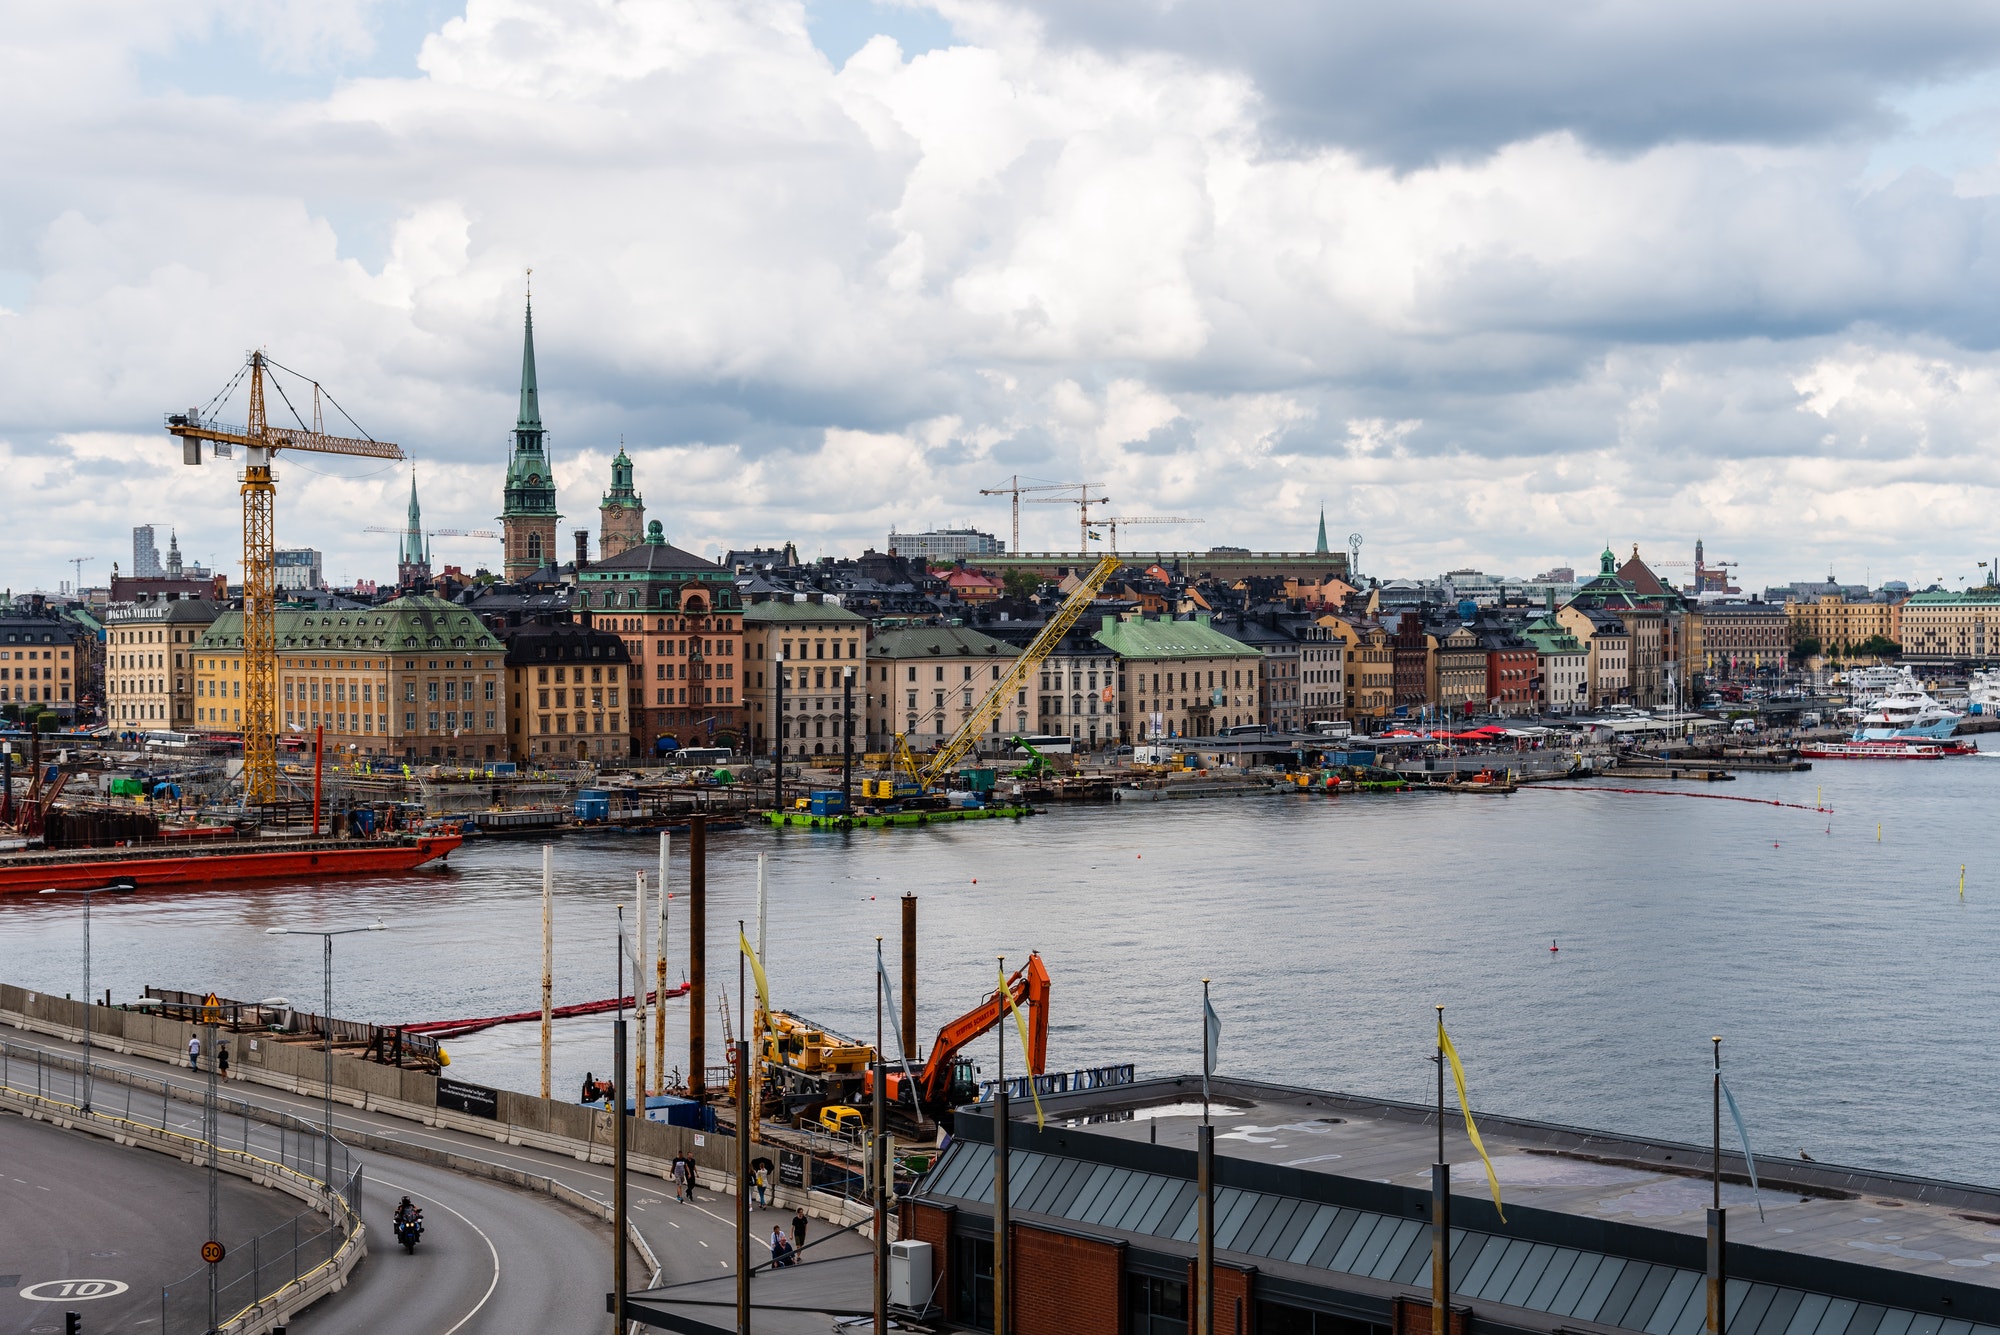 Construction works in the waterfront of the port of Stockholm